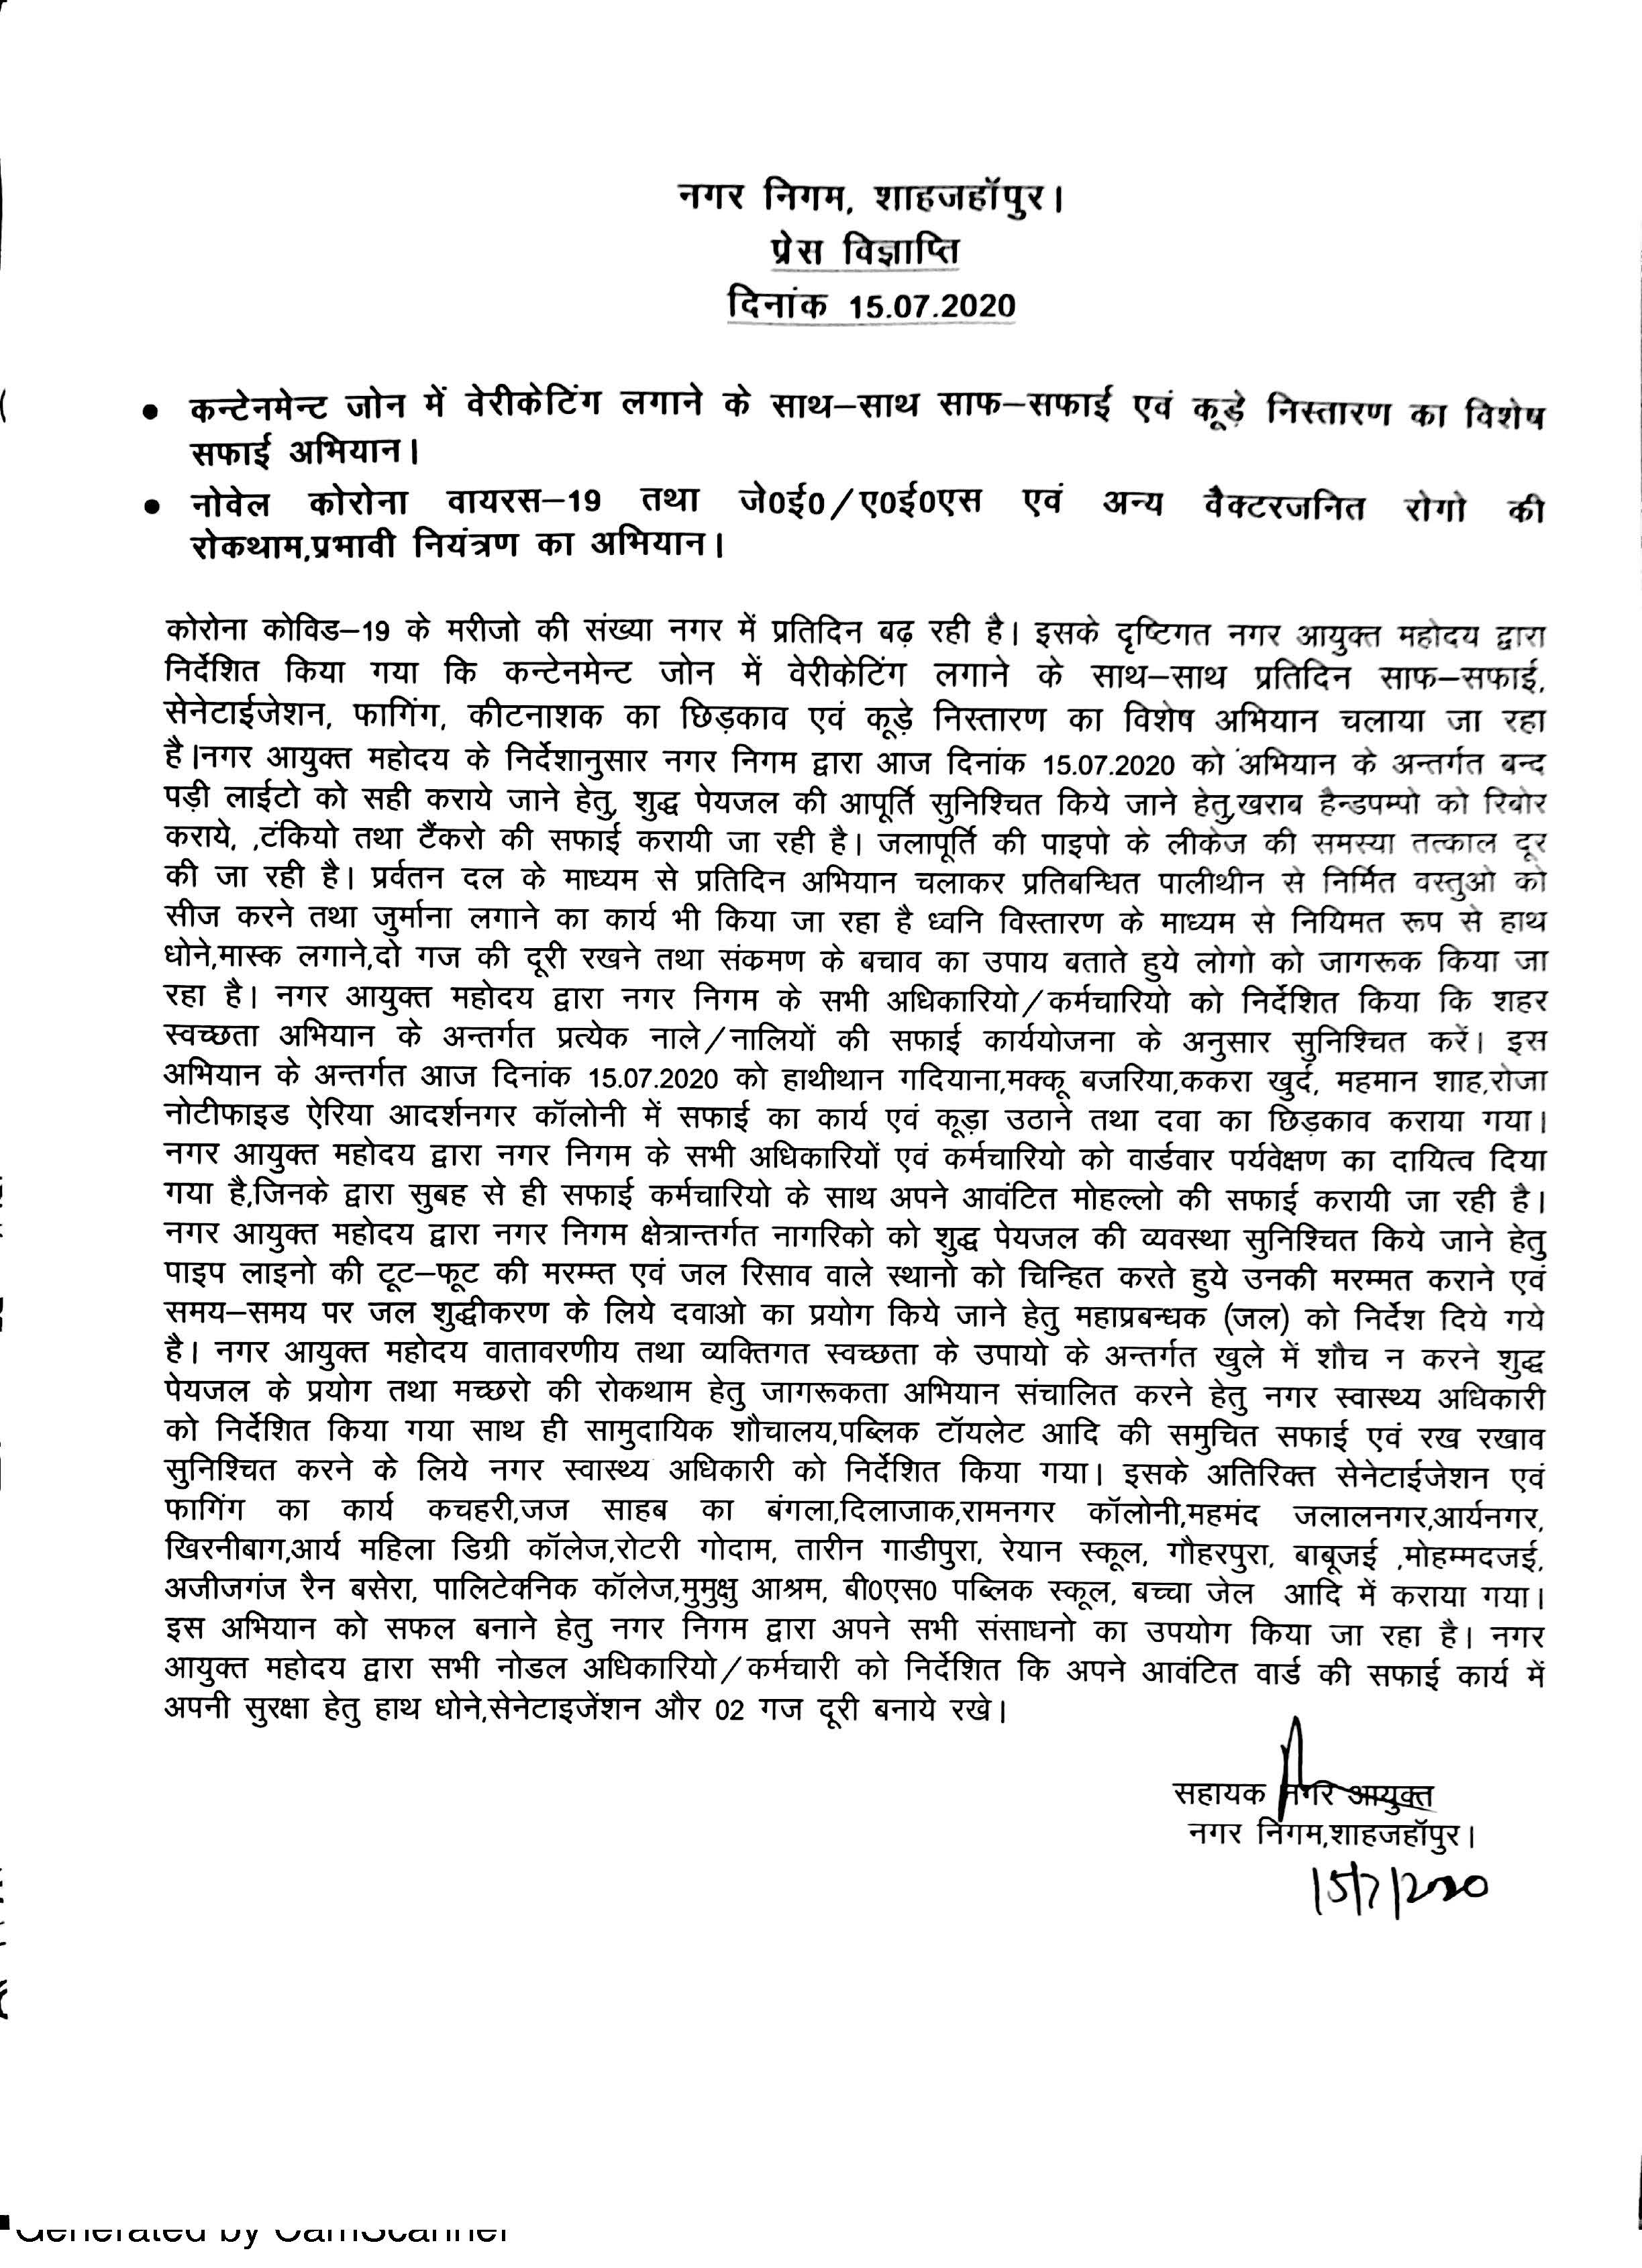 Regarding press release against the repairing of water taps, hand pumps and sanitation works in the containment zones of the city done on 15.07.2020  according to the guidelines of Municipal Commissioner